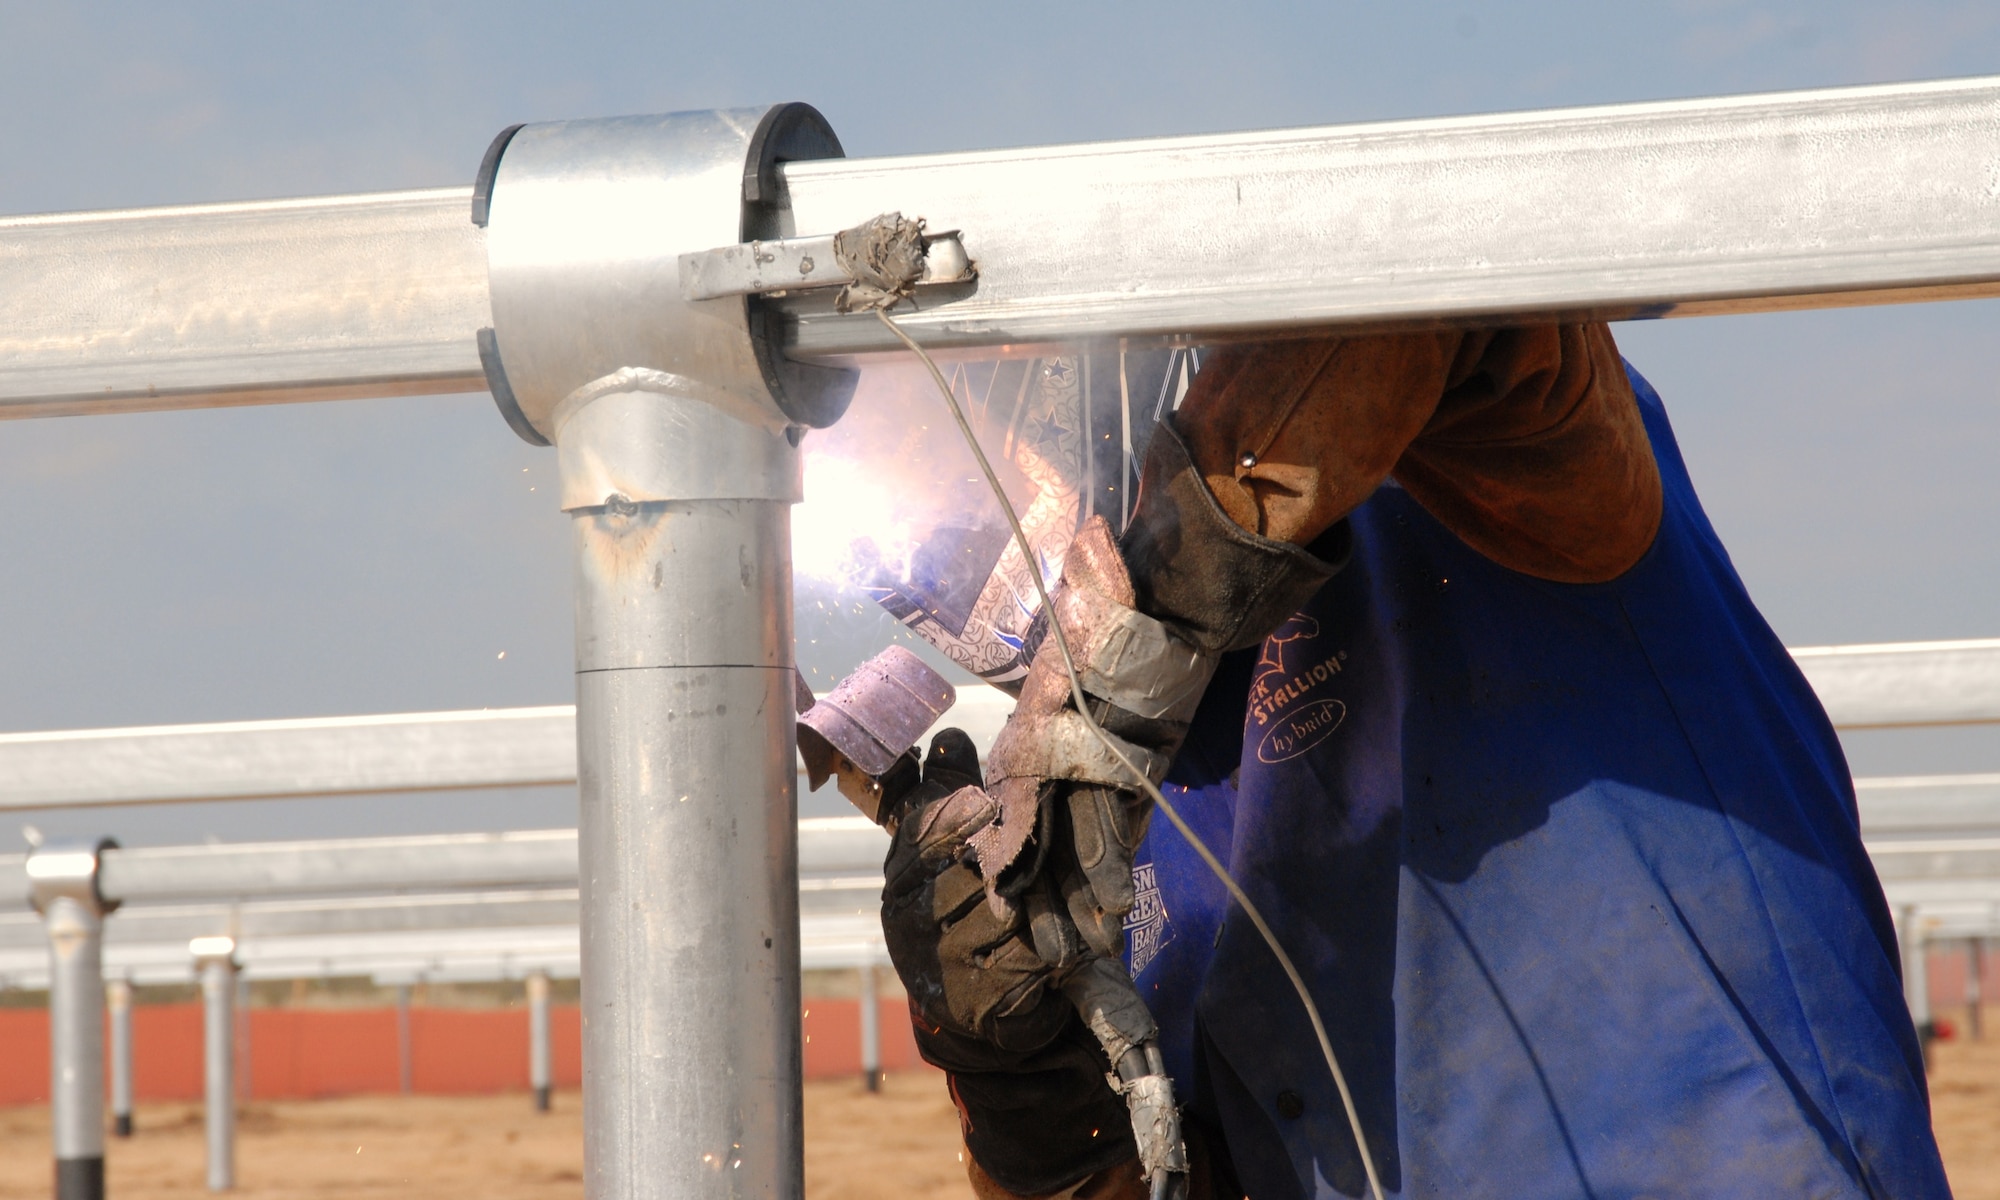 A worker welds a connection to a stand that will hold solar panels for one of the three solar farms being constructed around Edwards. One solar farm is located near Wolfe Avenue and Lancaster Boulevard, one is just off Rosamond Boulevard near the north gate and one is at the Air Force Research Laboratory Detachment 7. The locations were chosen because of the electricity substations located at each site. Once completed, the lines from the solar panels will be connected to Edwards' power grid. (Air Force photo by Dawn Waldman)